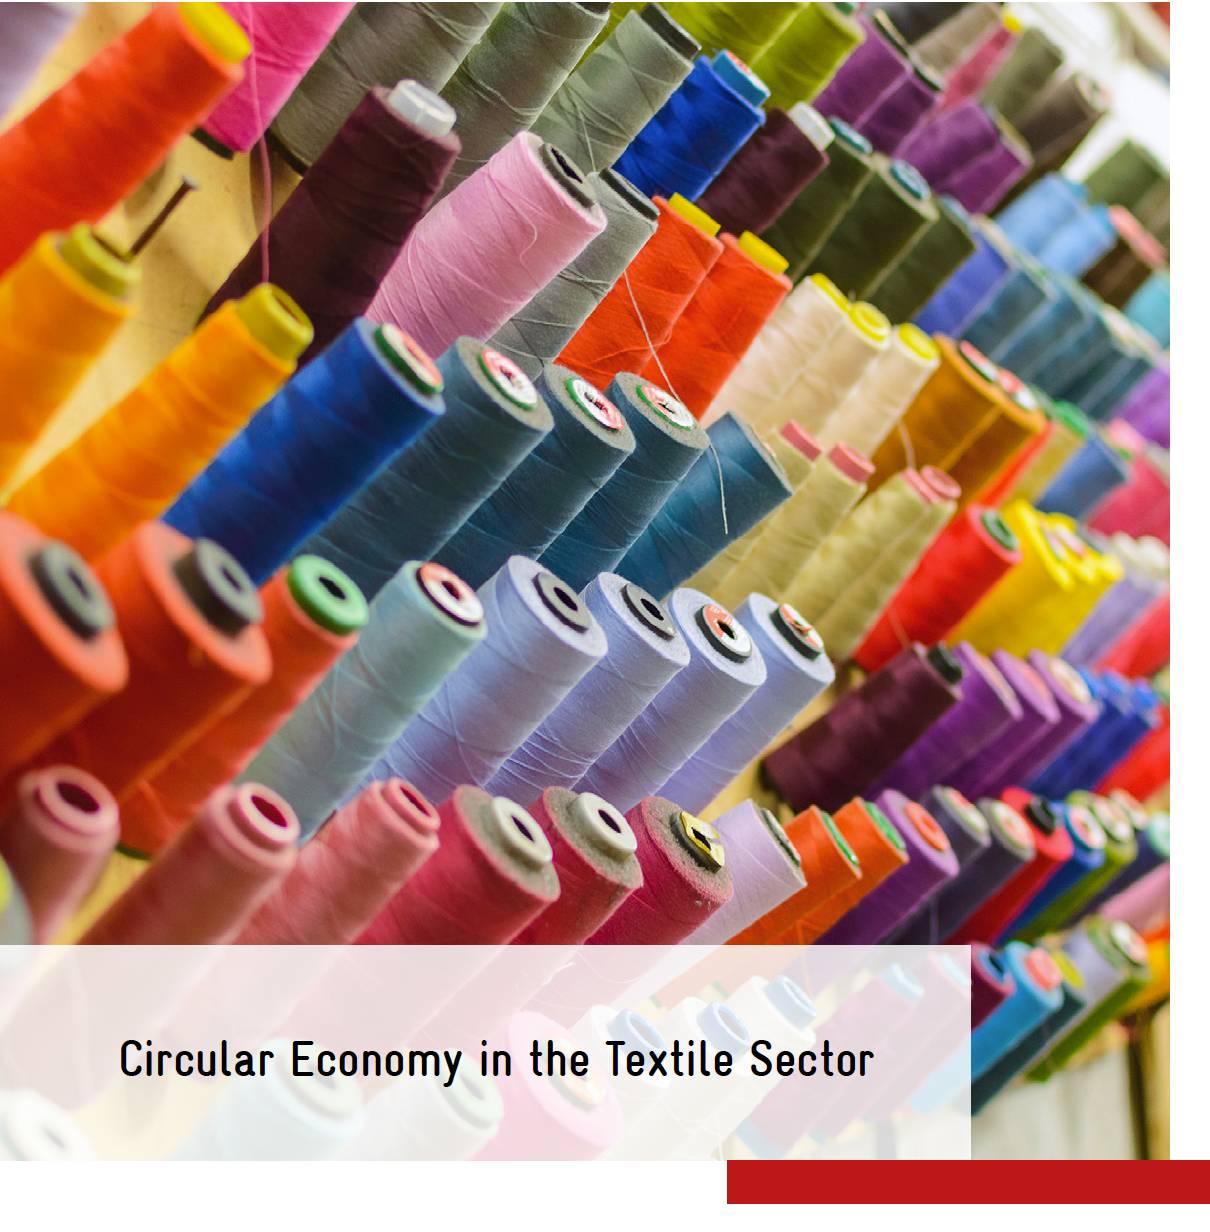 Circular Economy in the Textile Sector